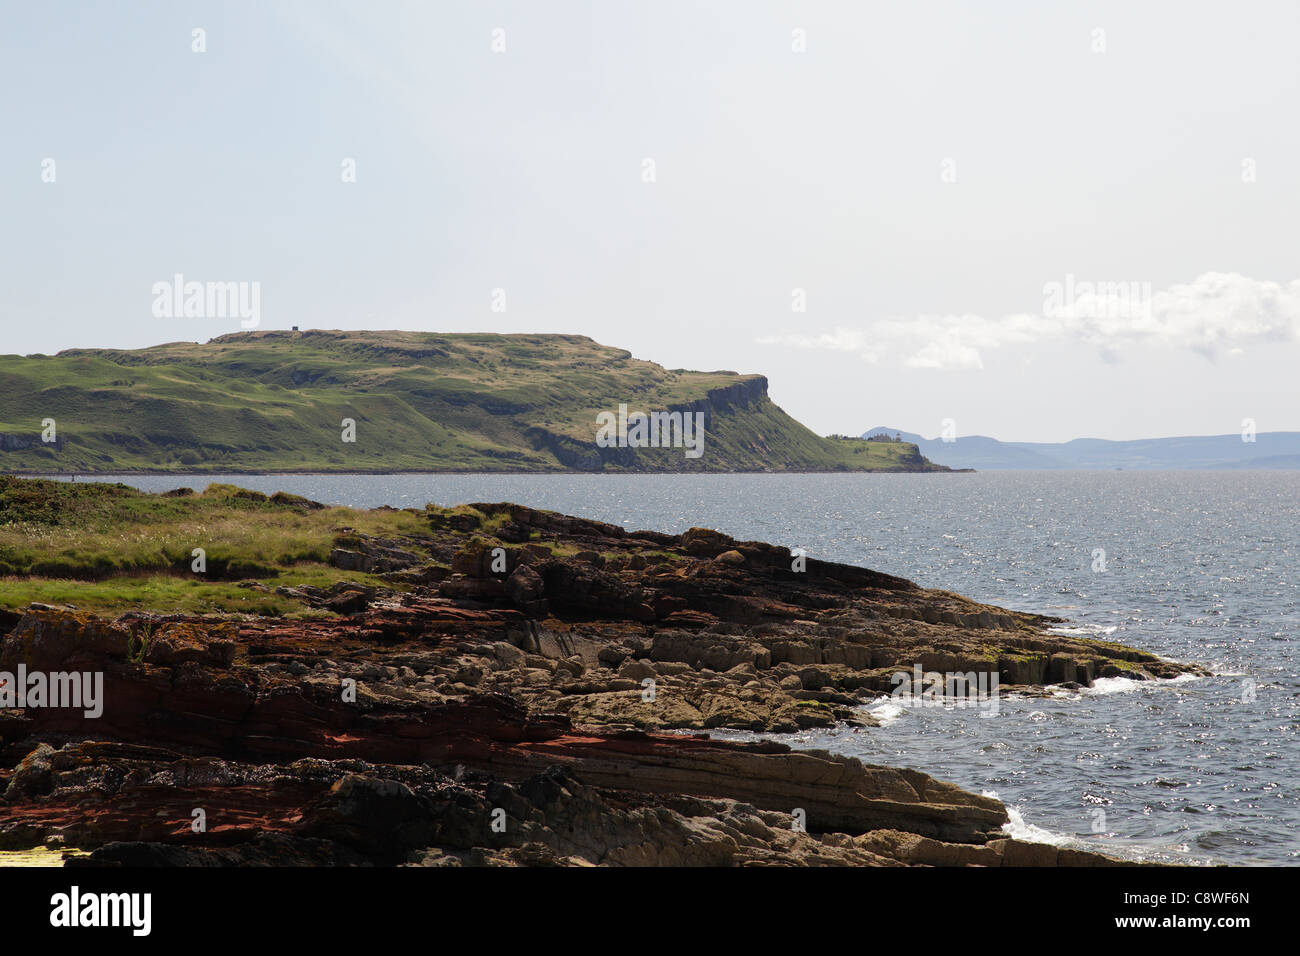 Looking across the Firth of Clyde to the island of Little Cumbrae from the island of Great Cumbrae, Scotland, UK Stock Photo